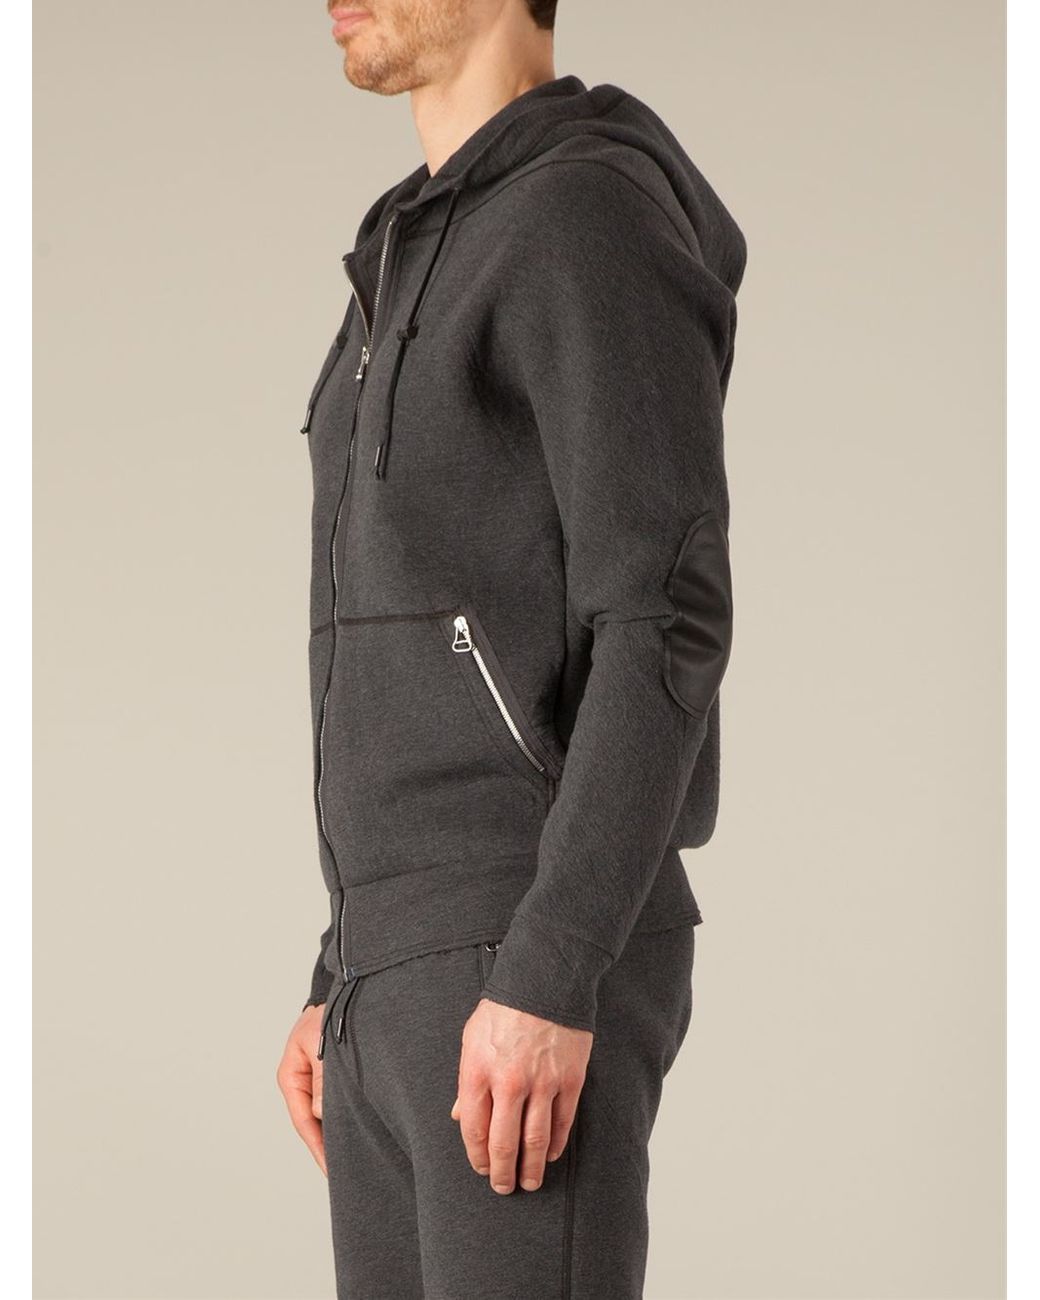 Lanvin Elbow Patch Hoodie in Gray for Men | Lyst